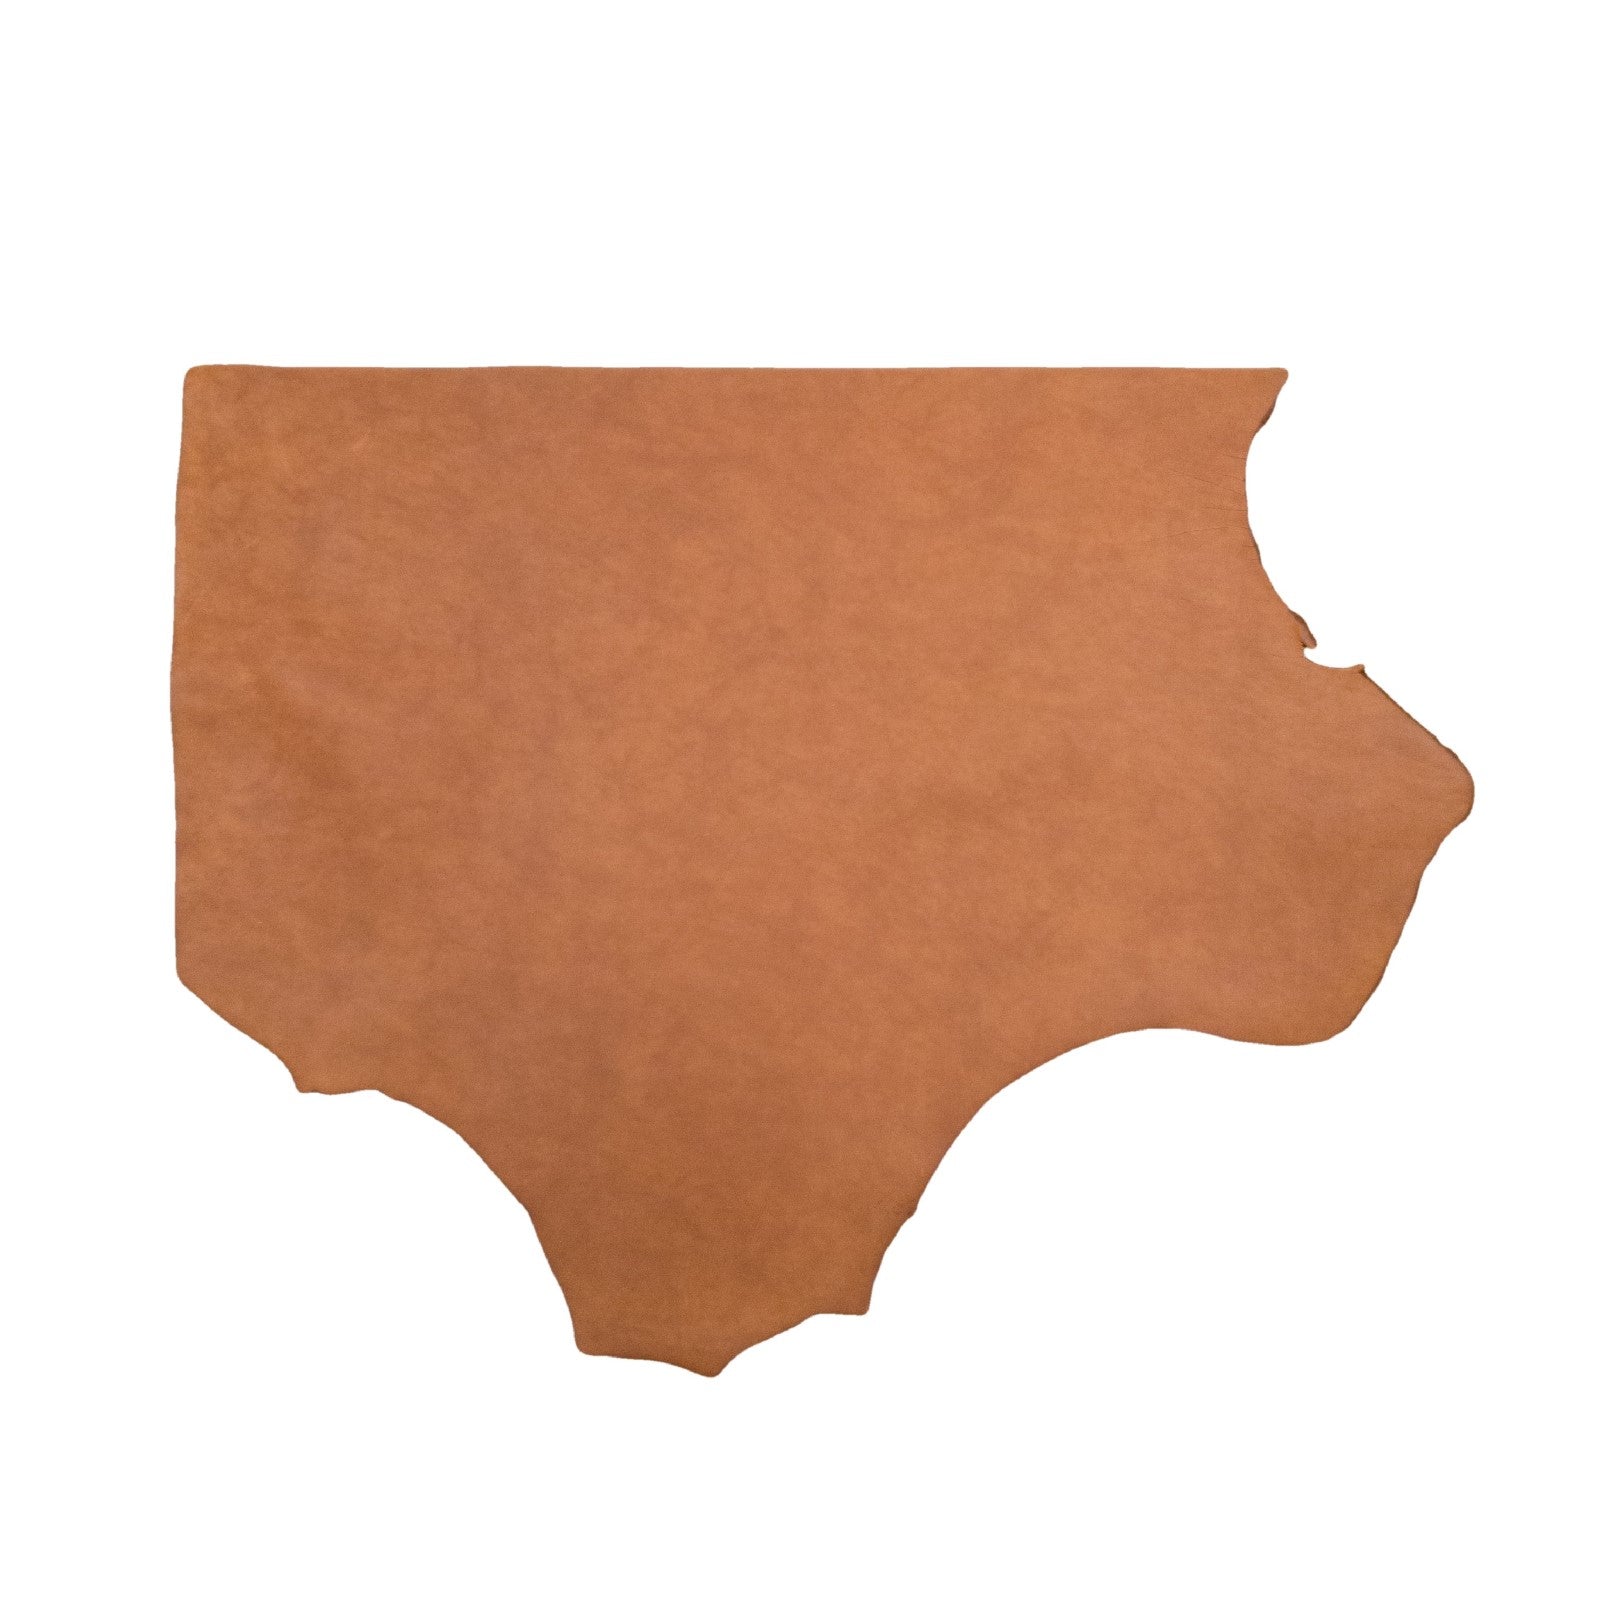 Taos (Oro), SB Foot, Non-stock, 5-6oz, Oil Tanned Hides, Bottom Piece / 6.5 - 7.5 Sq Ft | The Leather Guy